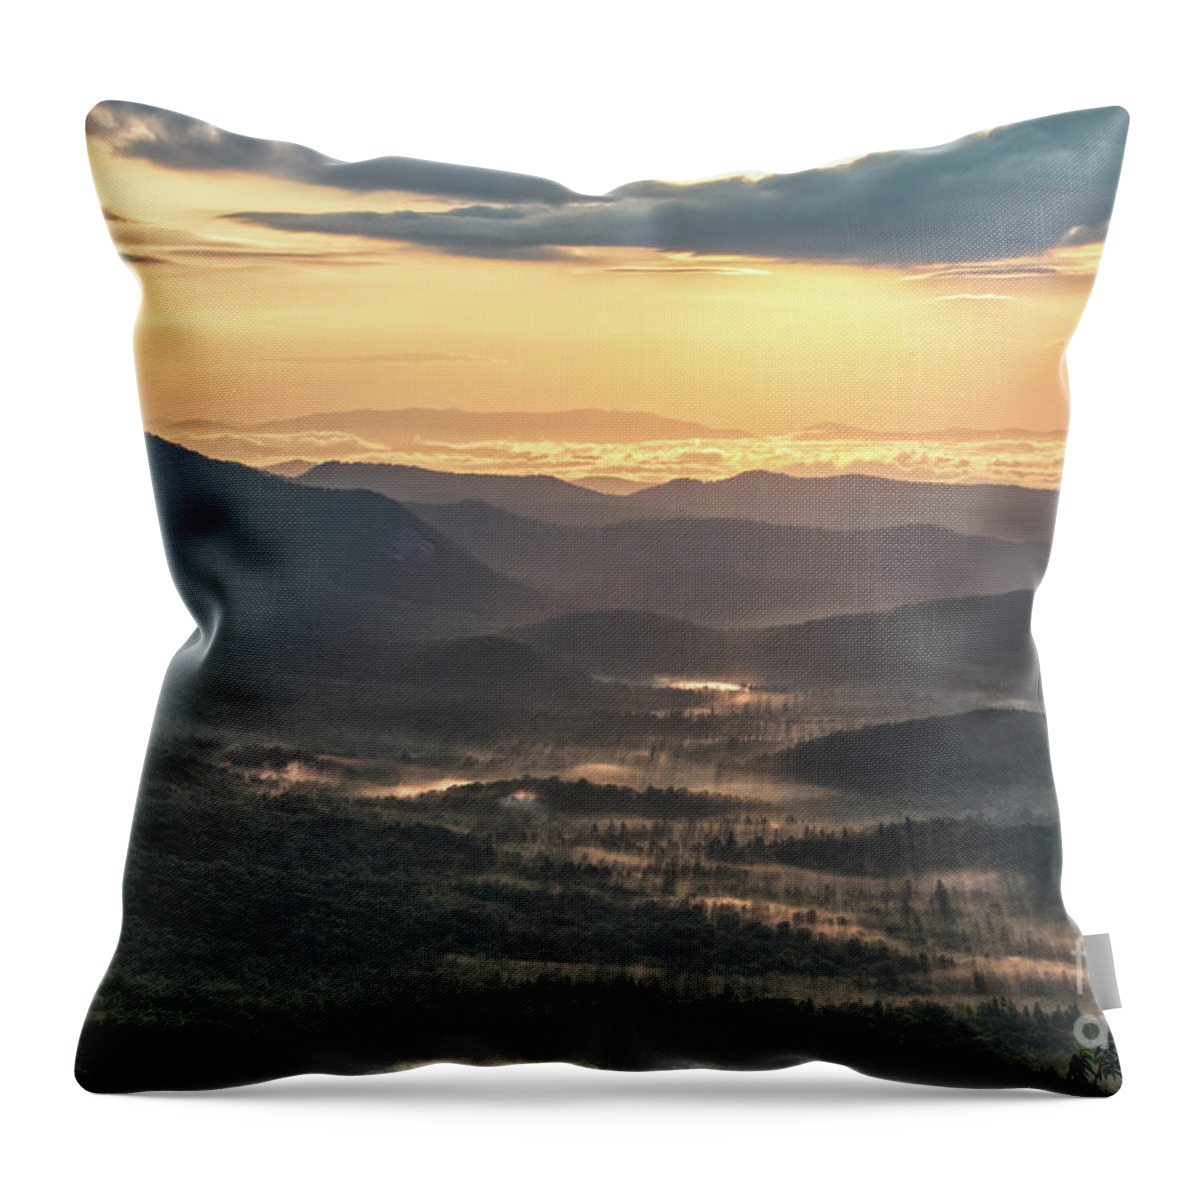 Blue Ridge Parkway Throw Pillow featuring the photograph Scenic Overlook 6 by Phil Perkins